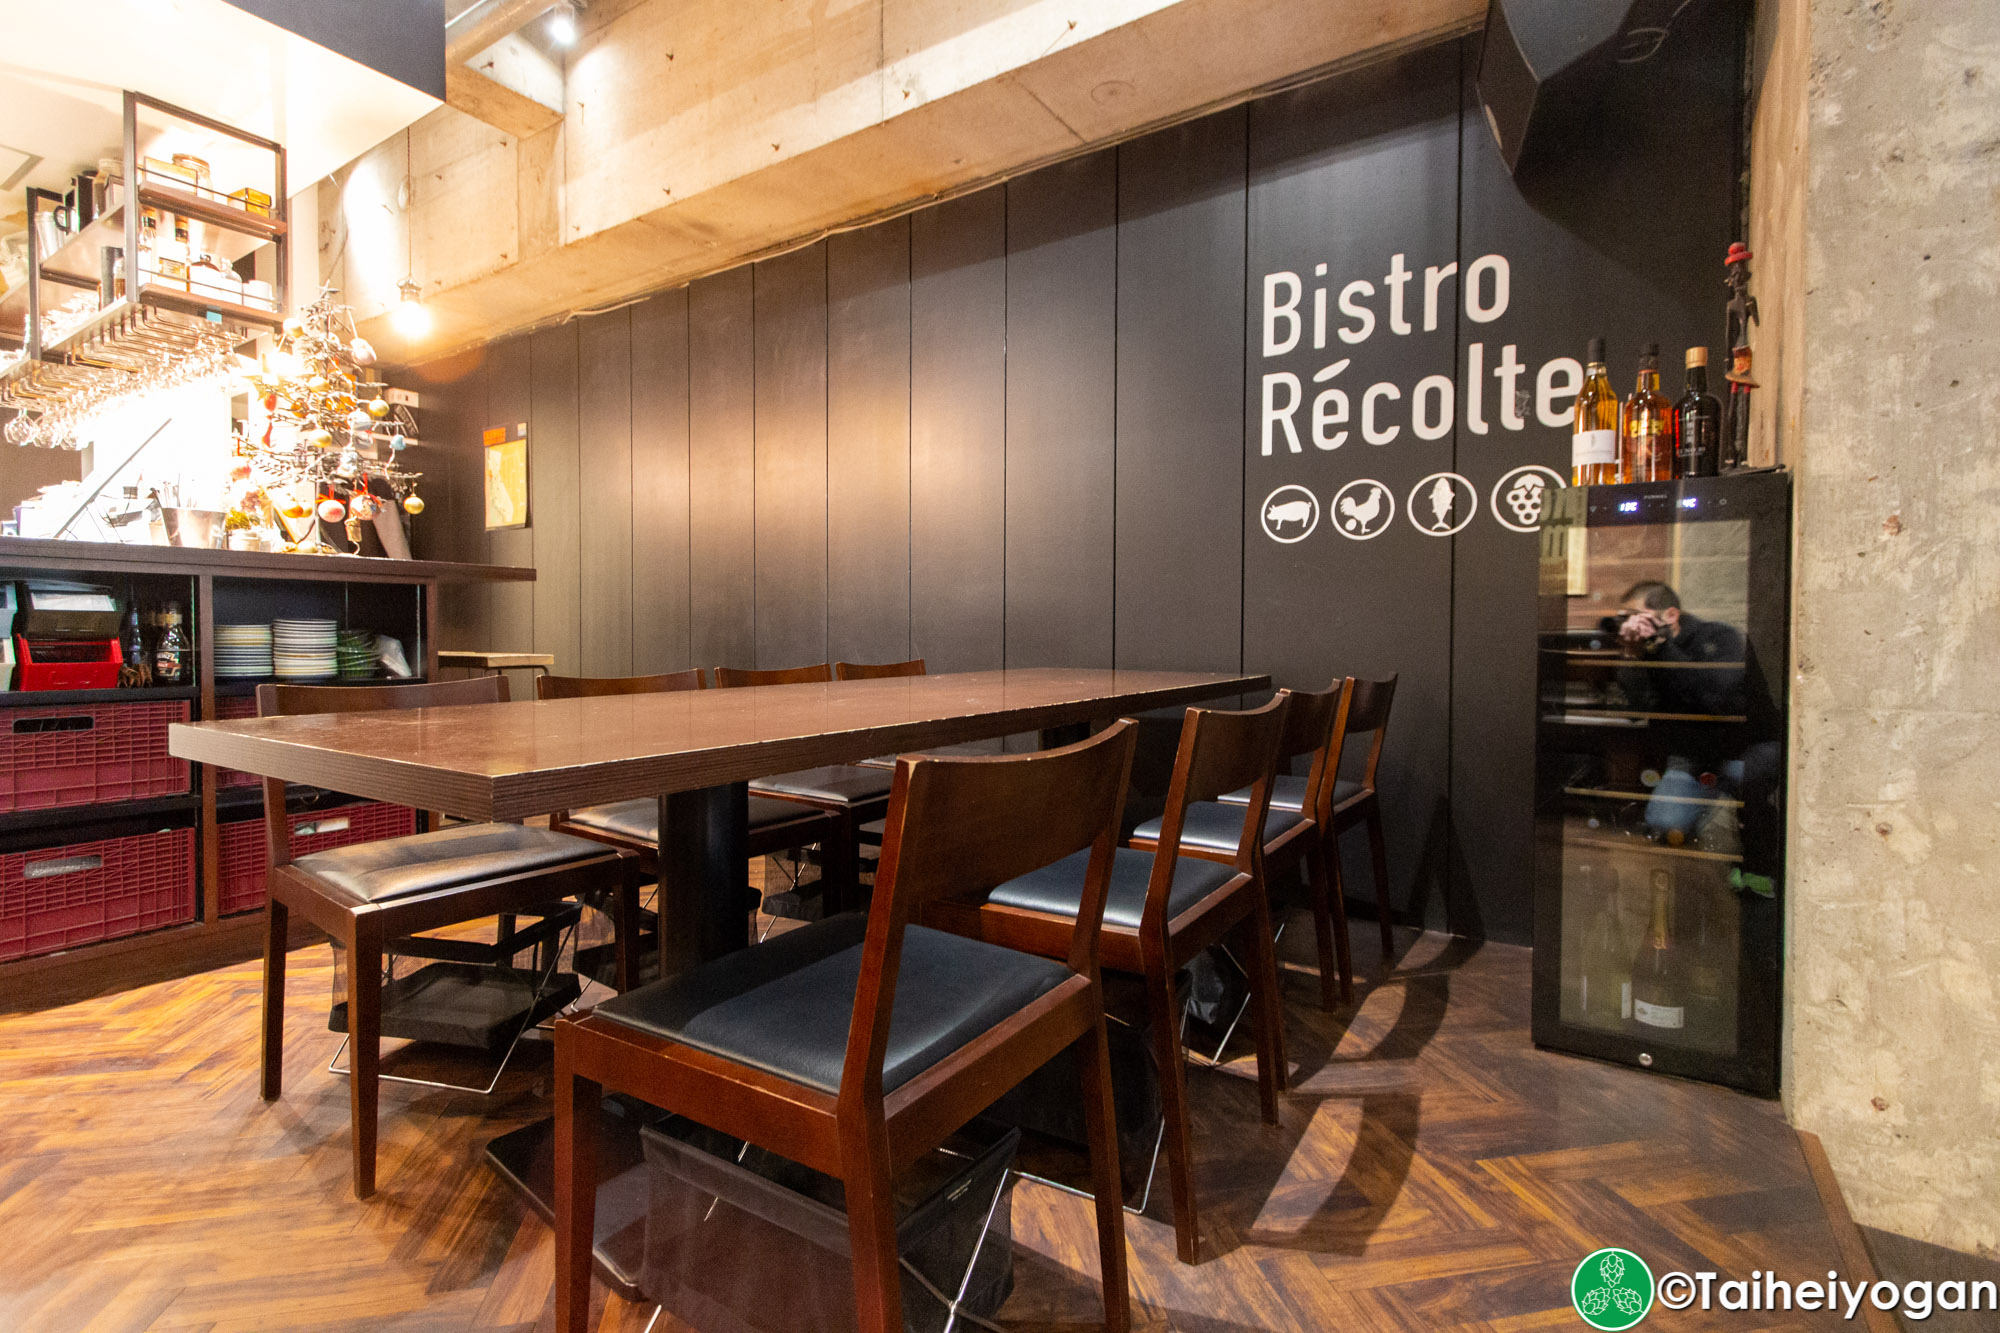 Bistro Recolte - Interior - Table Seating